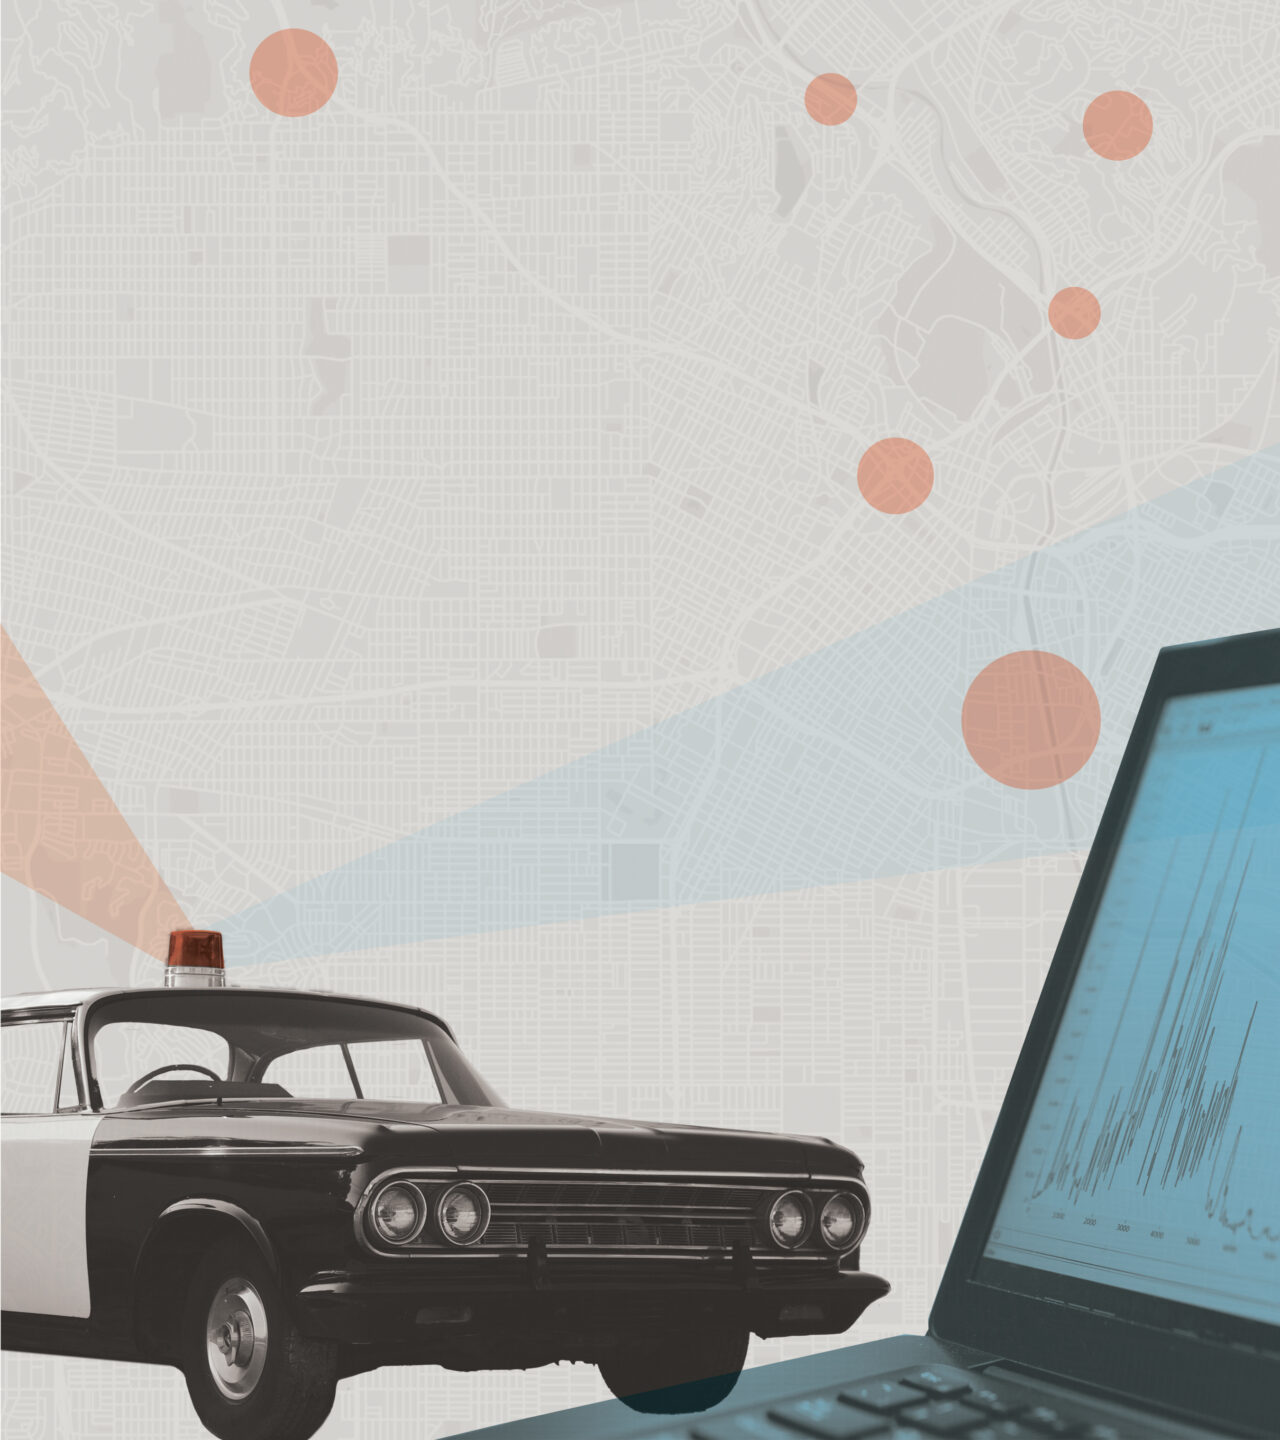 An illustration of a police car and laptop, superimposed over a city map with points highlighted